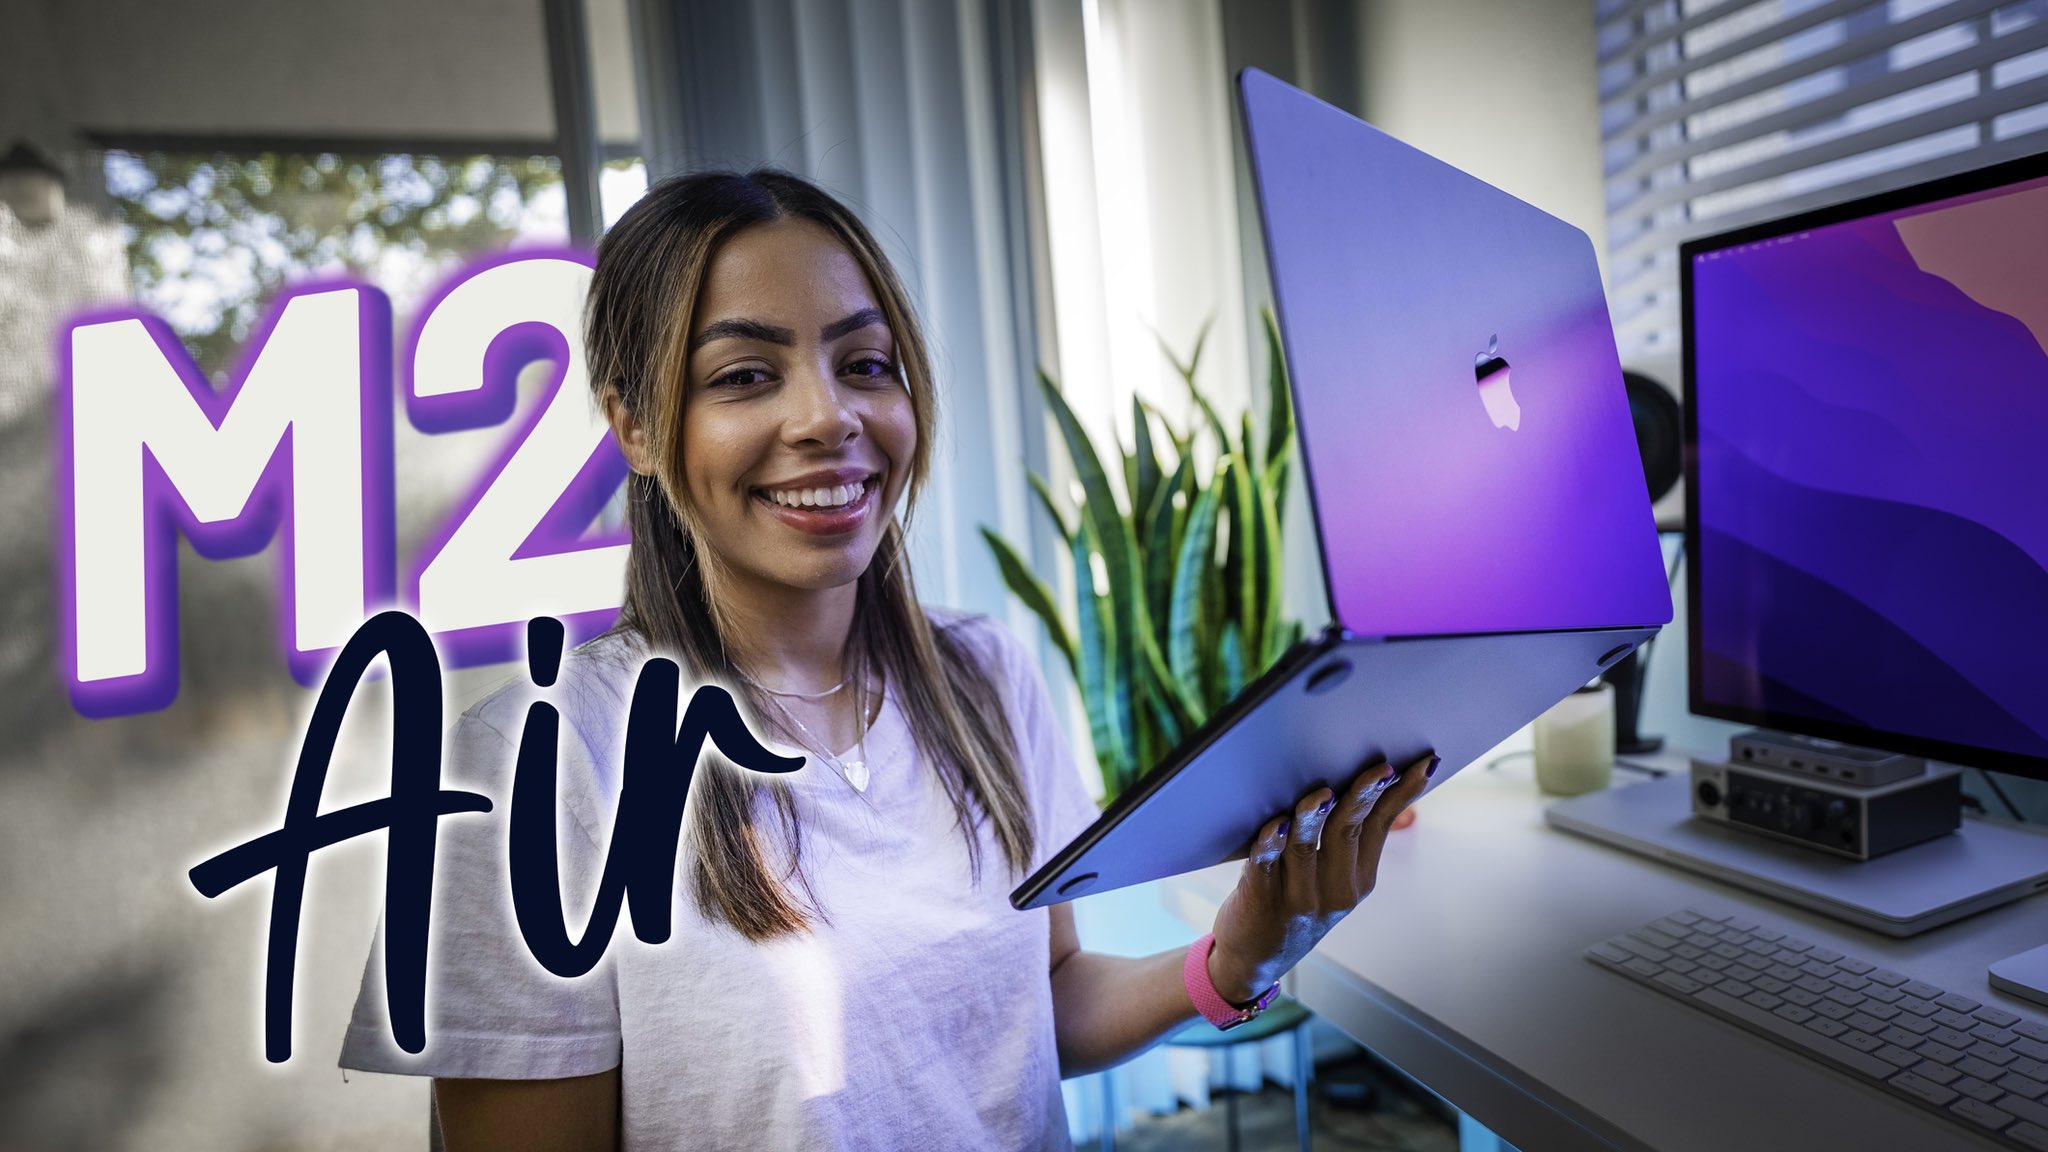 MacBook Air M2 MIDNIGHT Unboxing and Setup - 2022 